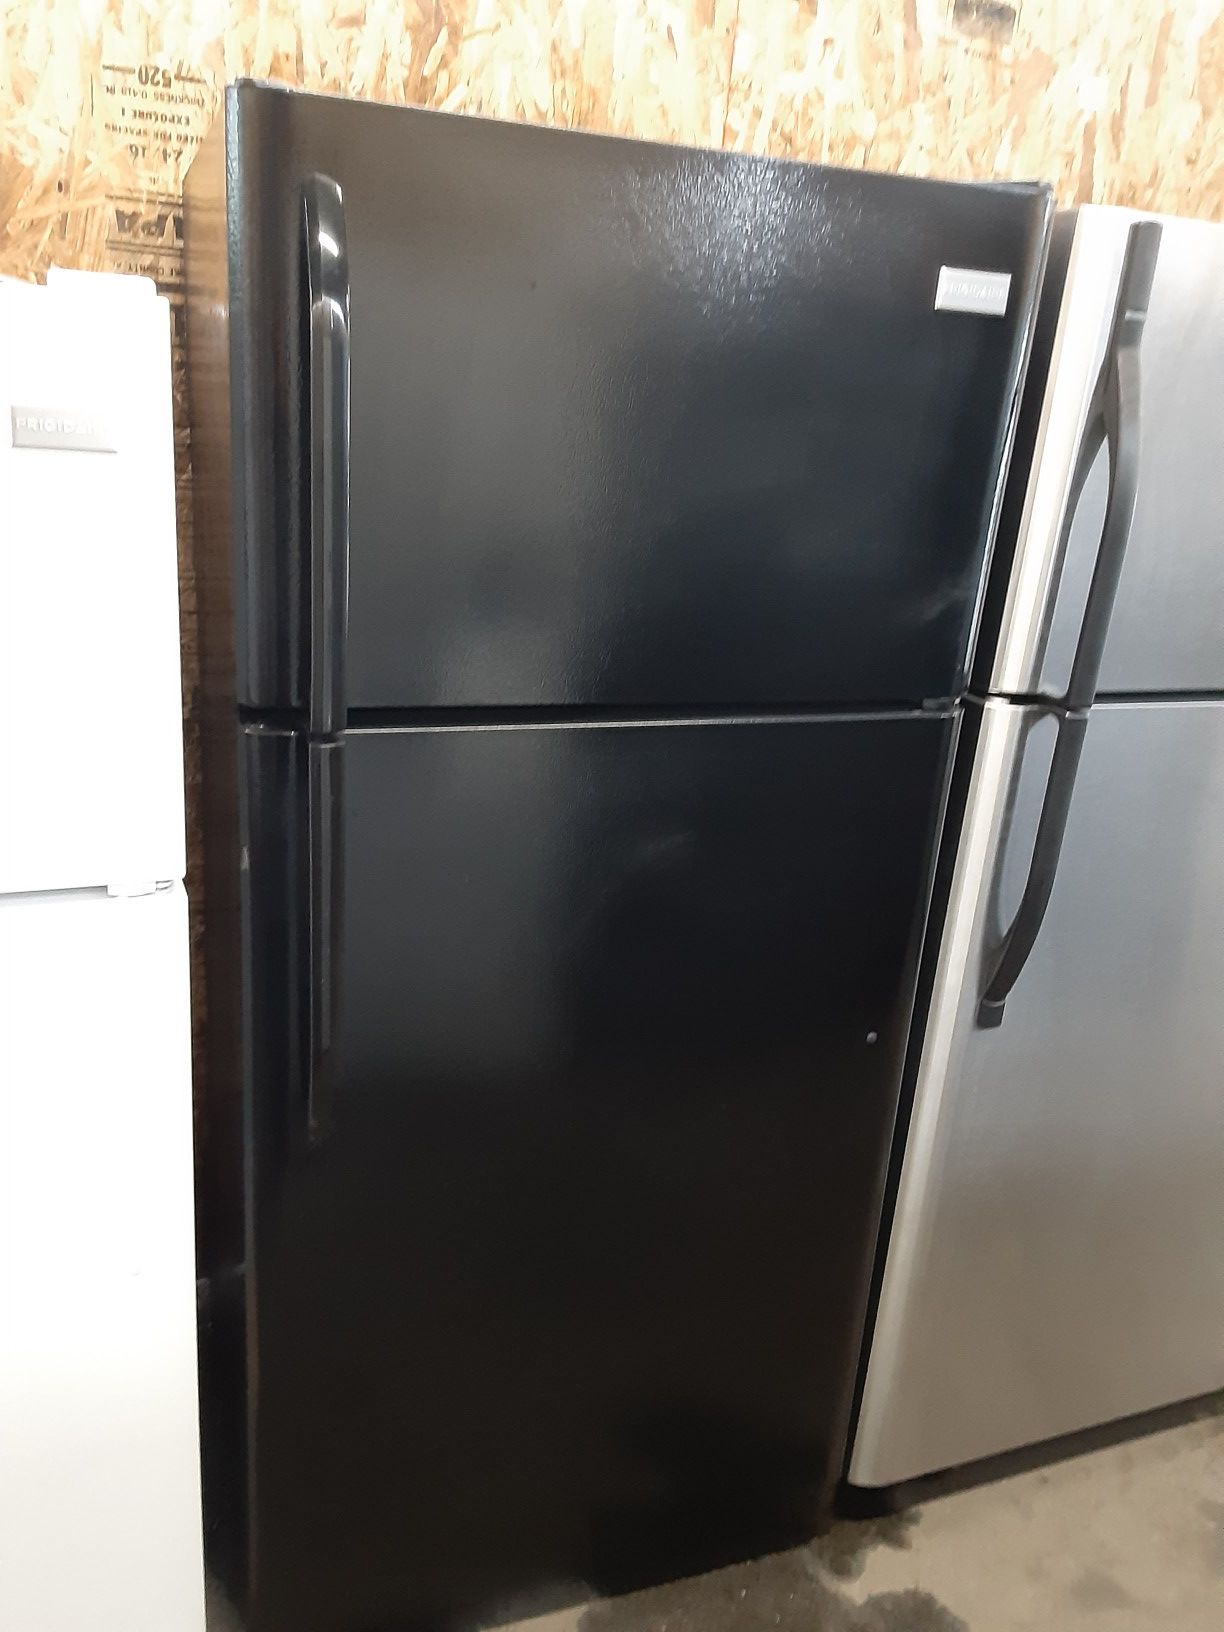 $299 Frigidaire black 18 cubic refrigerator apartment size includes delivery in the San Fernando Valley of warranty and installation